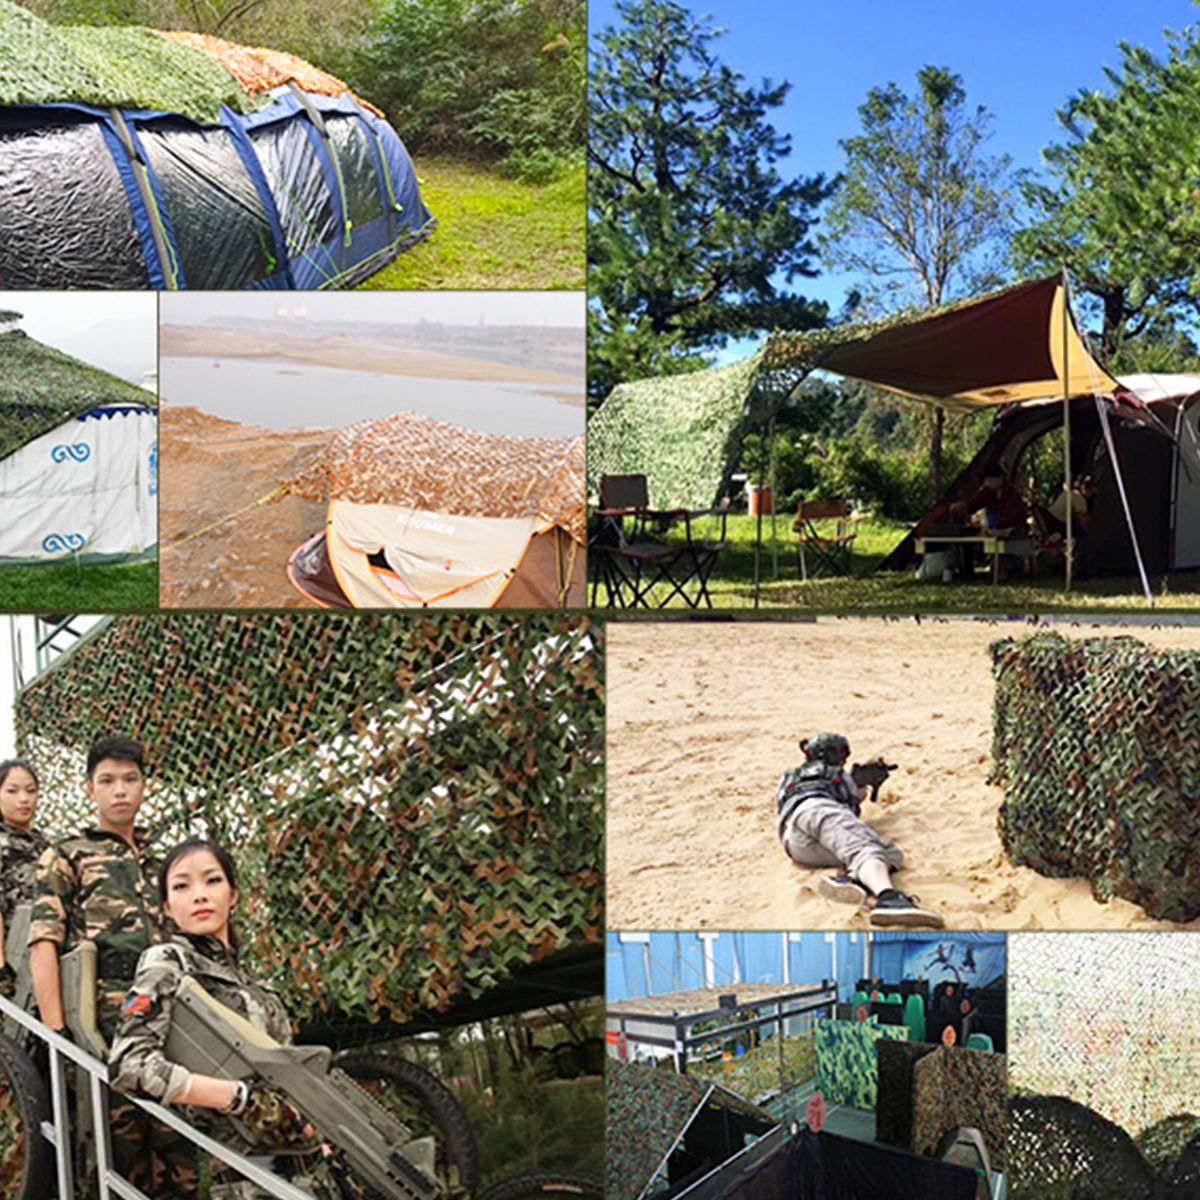 15mX6m-Jungle-Camo-Netting-Camouflage-Net-for-Car-Cover-Camping-Woodland-Military-Hunting-1358047